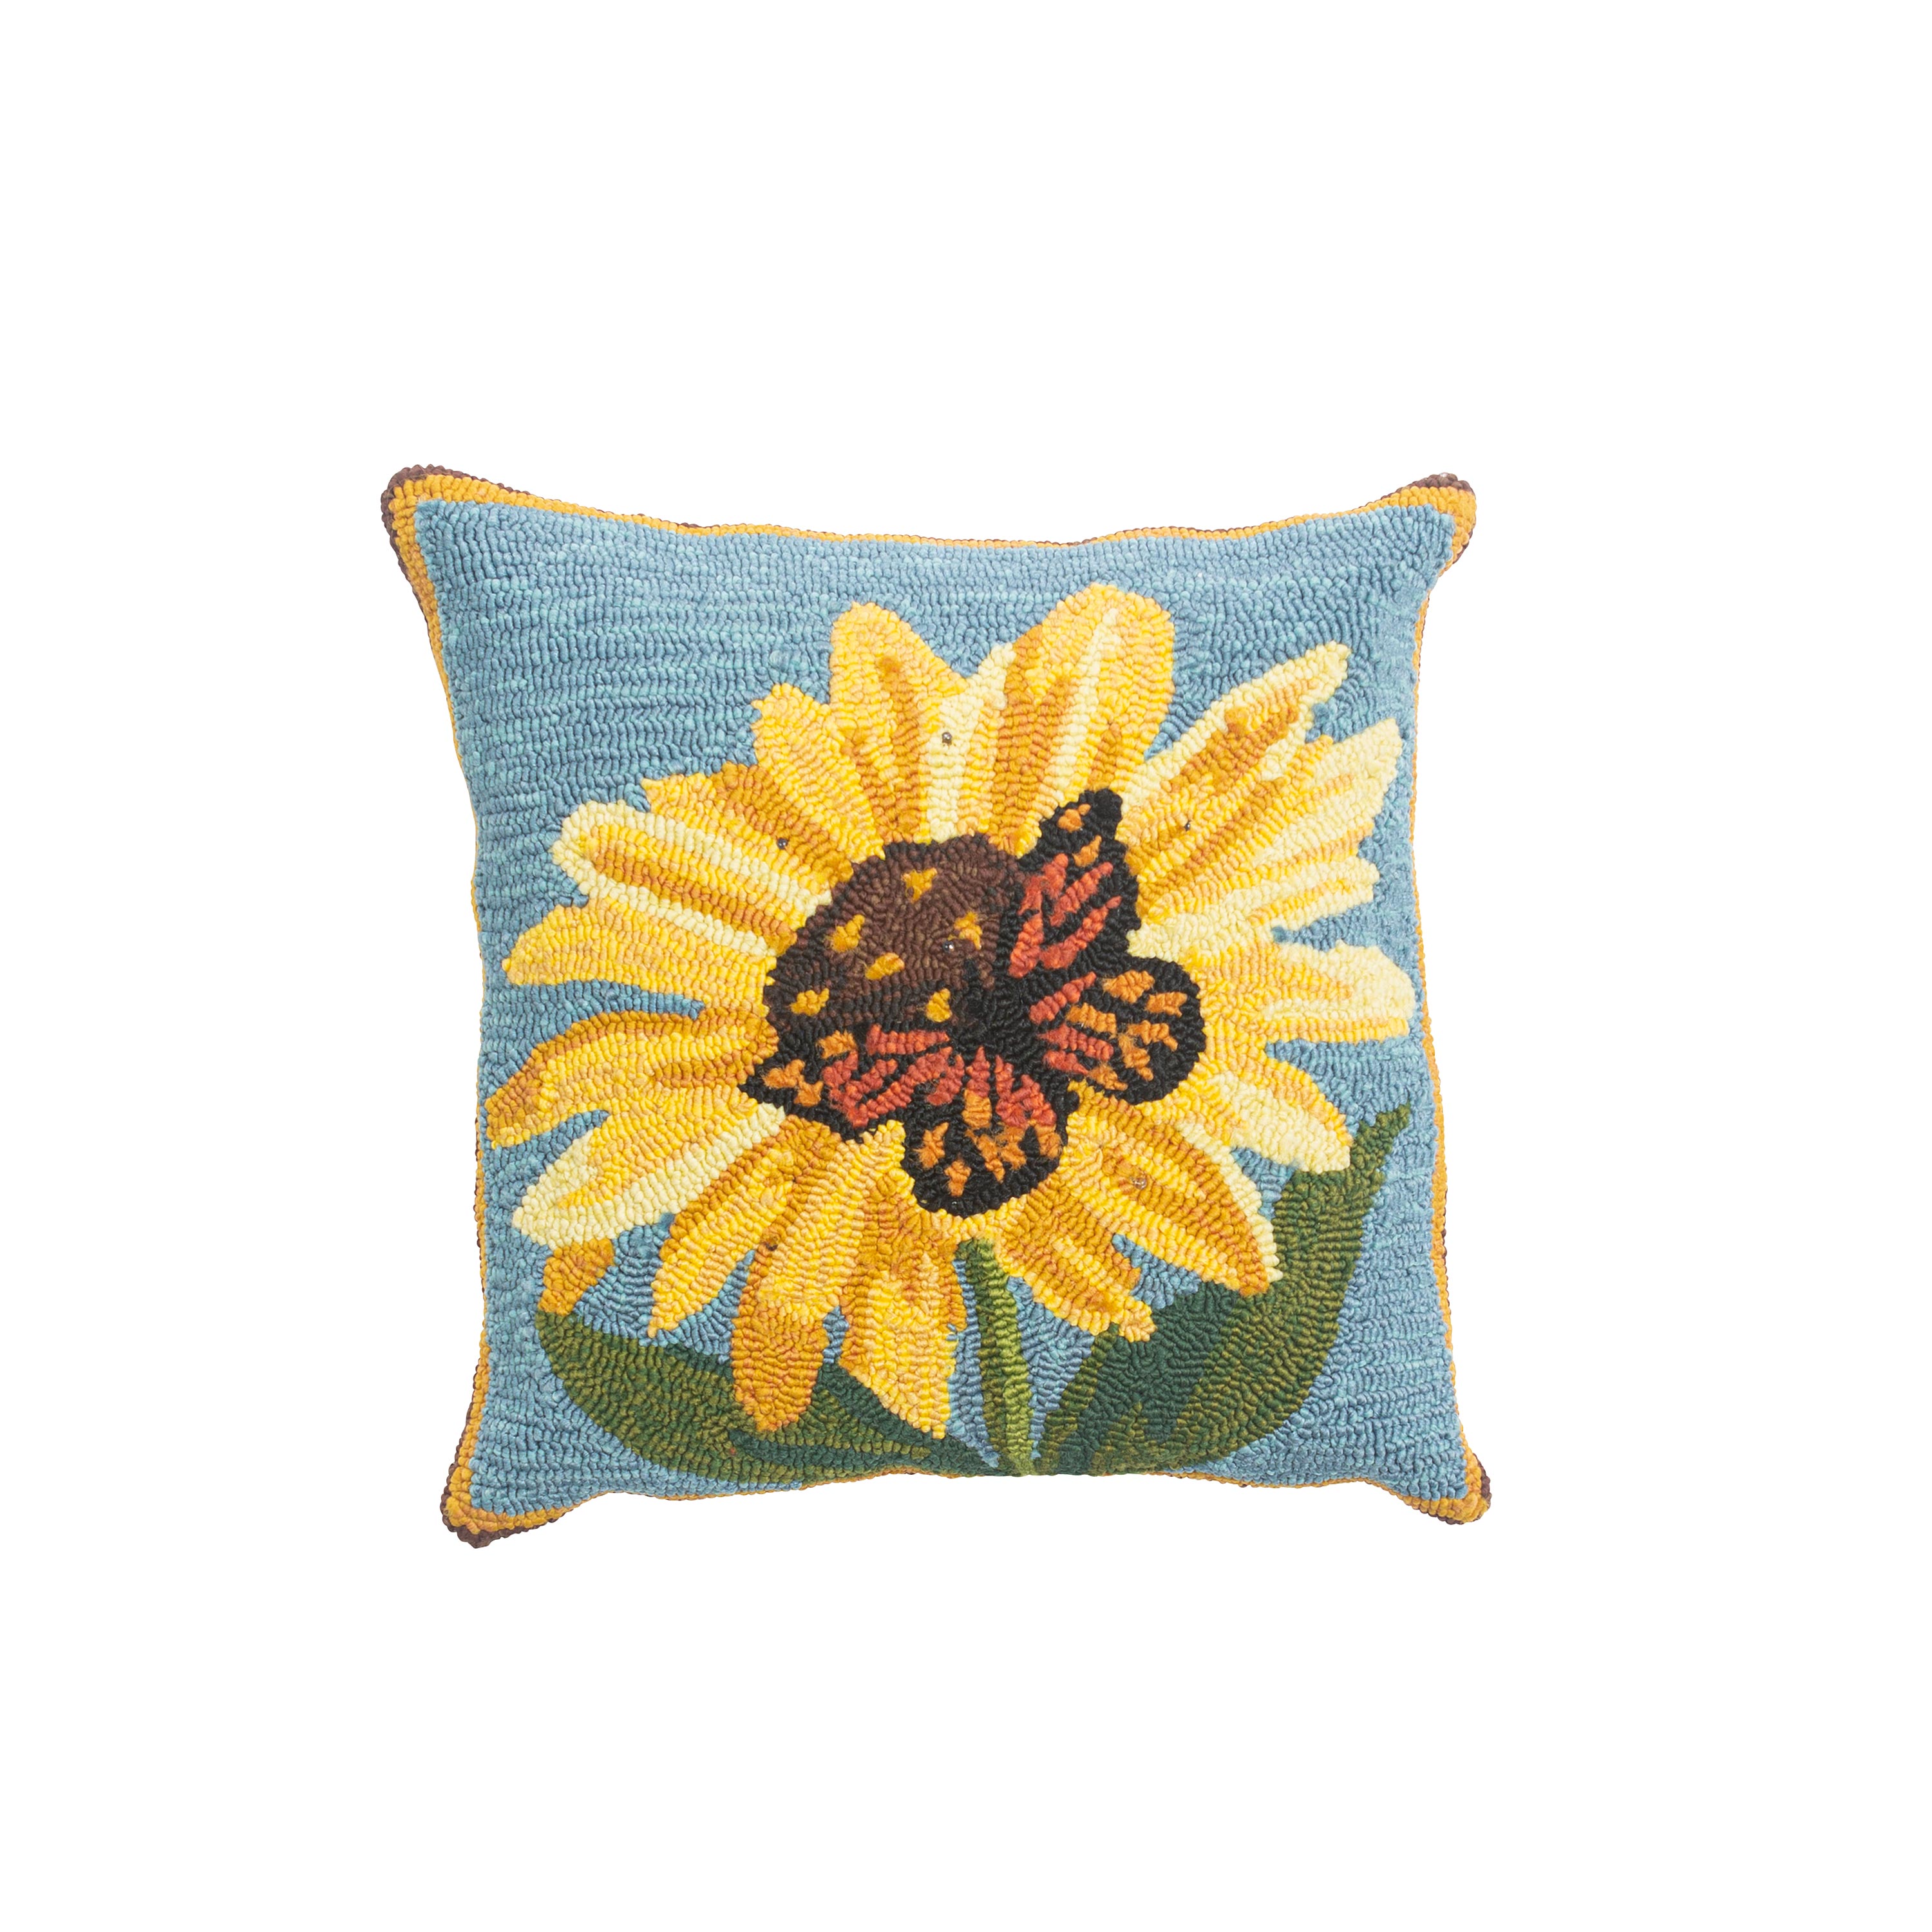 Indoor/Outdoor Sunflower and Butterfly Hooked Polypropylene Throw Pillow